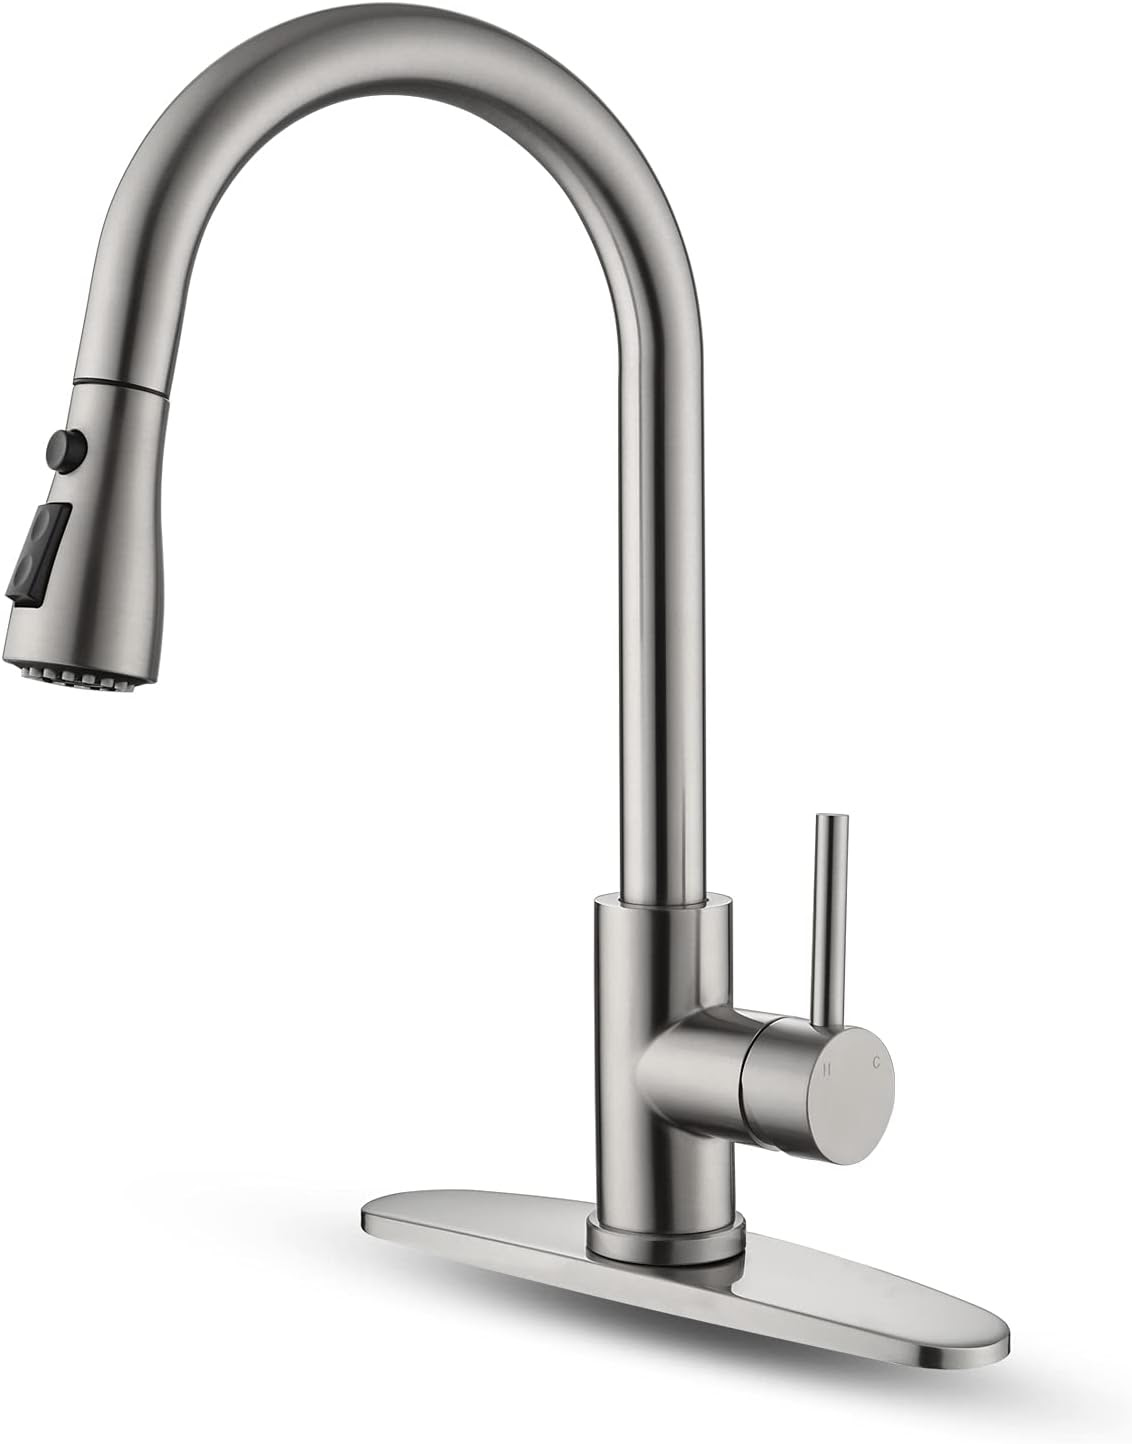 TIAHYLLE Kitchen Faucet with Pull Down Sprayer. 1200units. EXW Los Angeles $19.00unit.